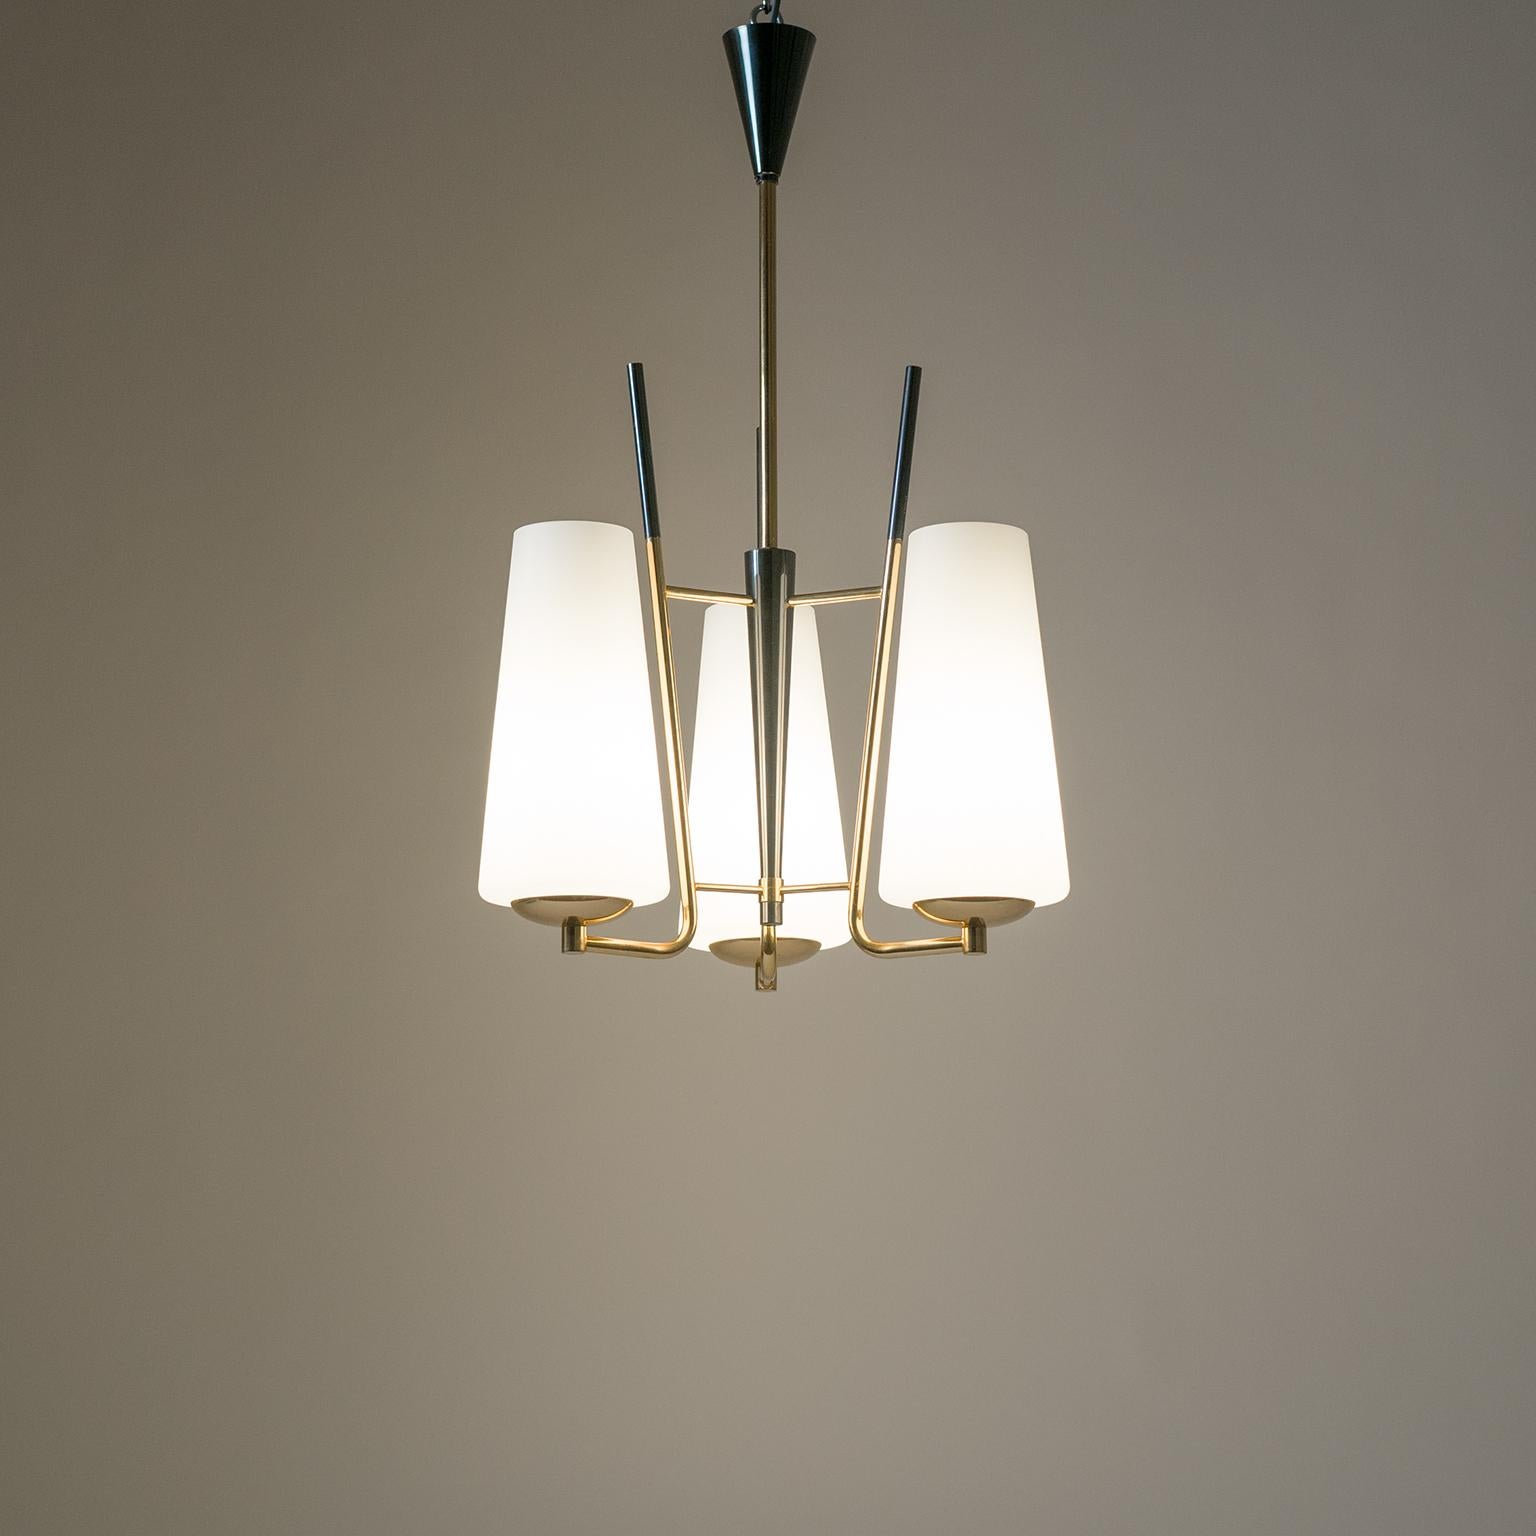 French Modernist Chandelier, 1950s, Satin Glass and Brass 6